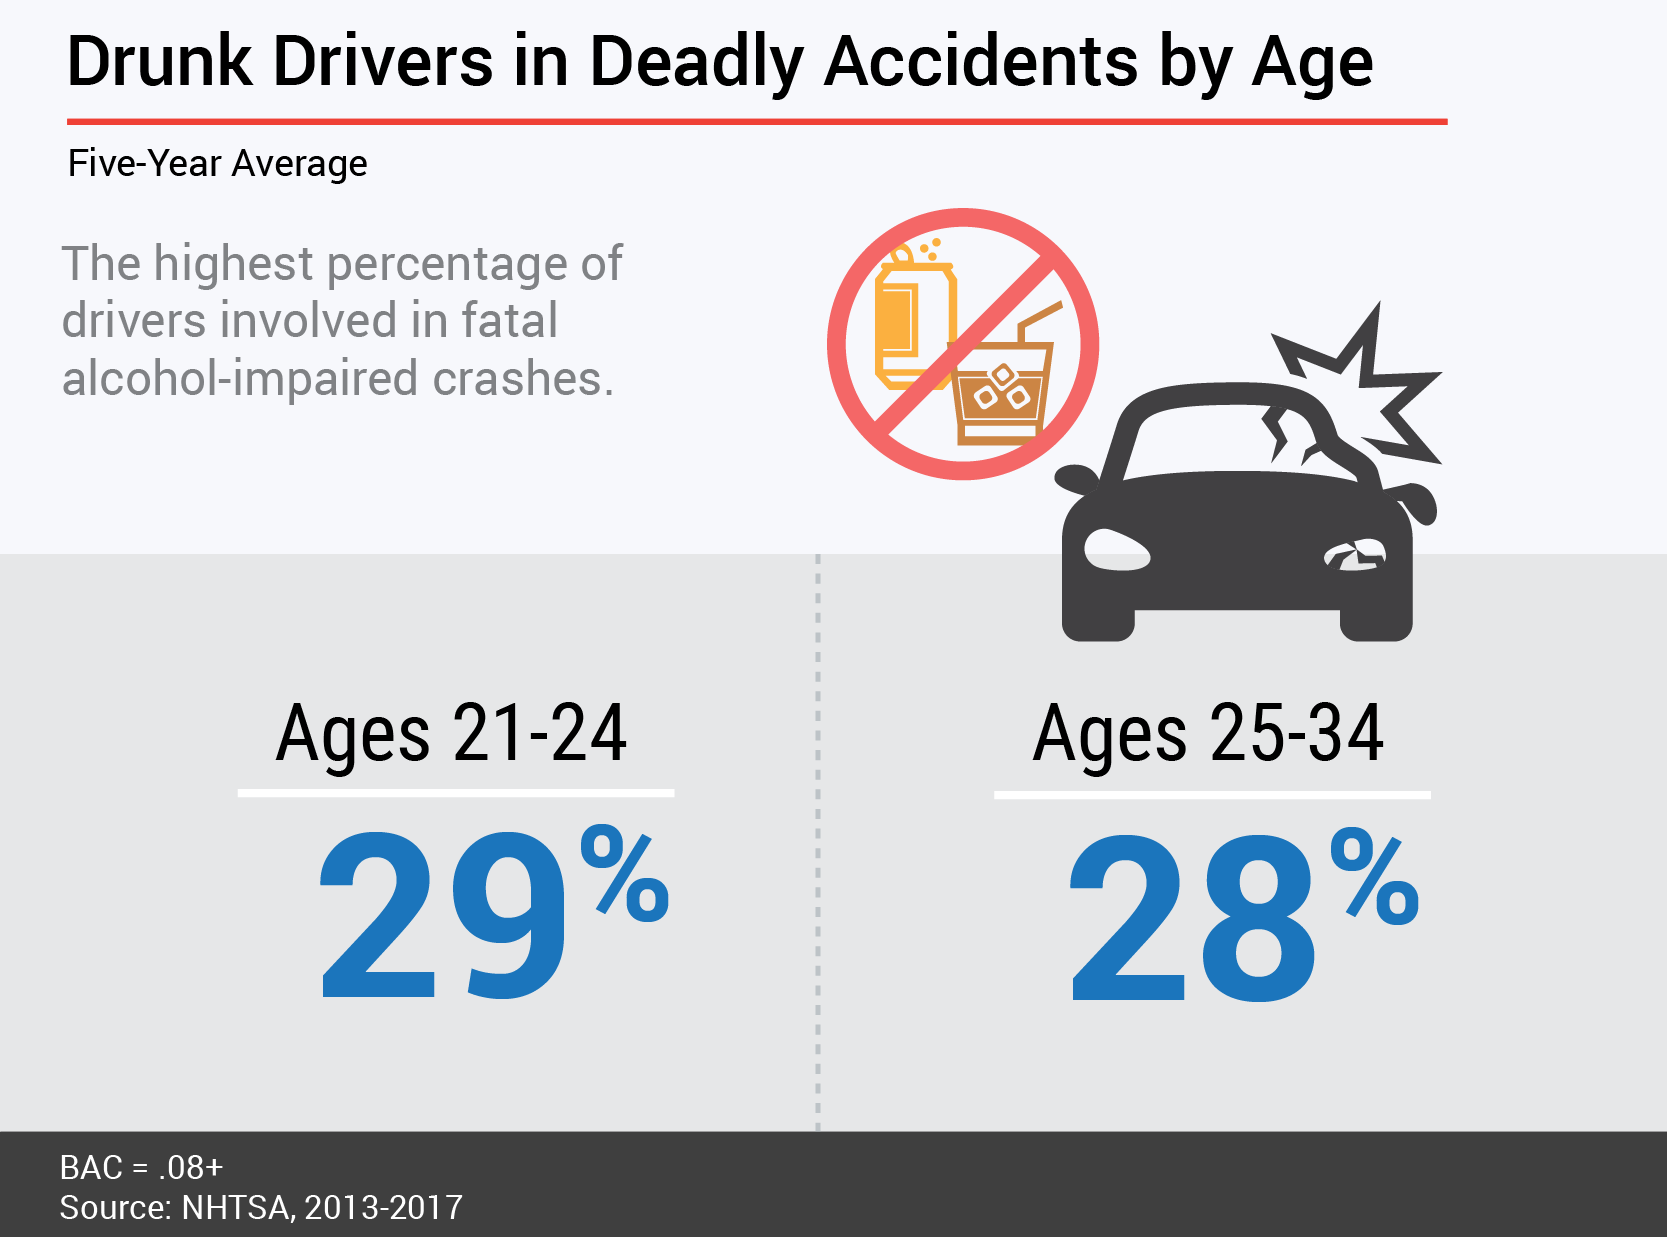 Drunk Driving Study - Fatal Accidents by Age